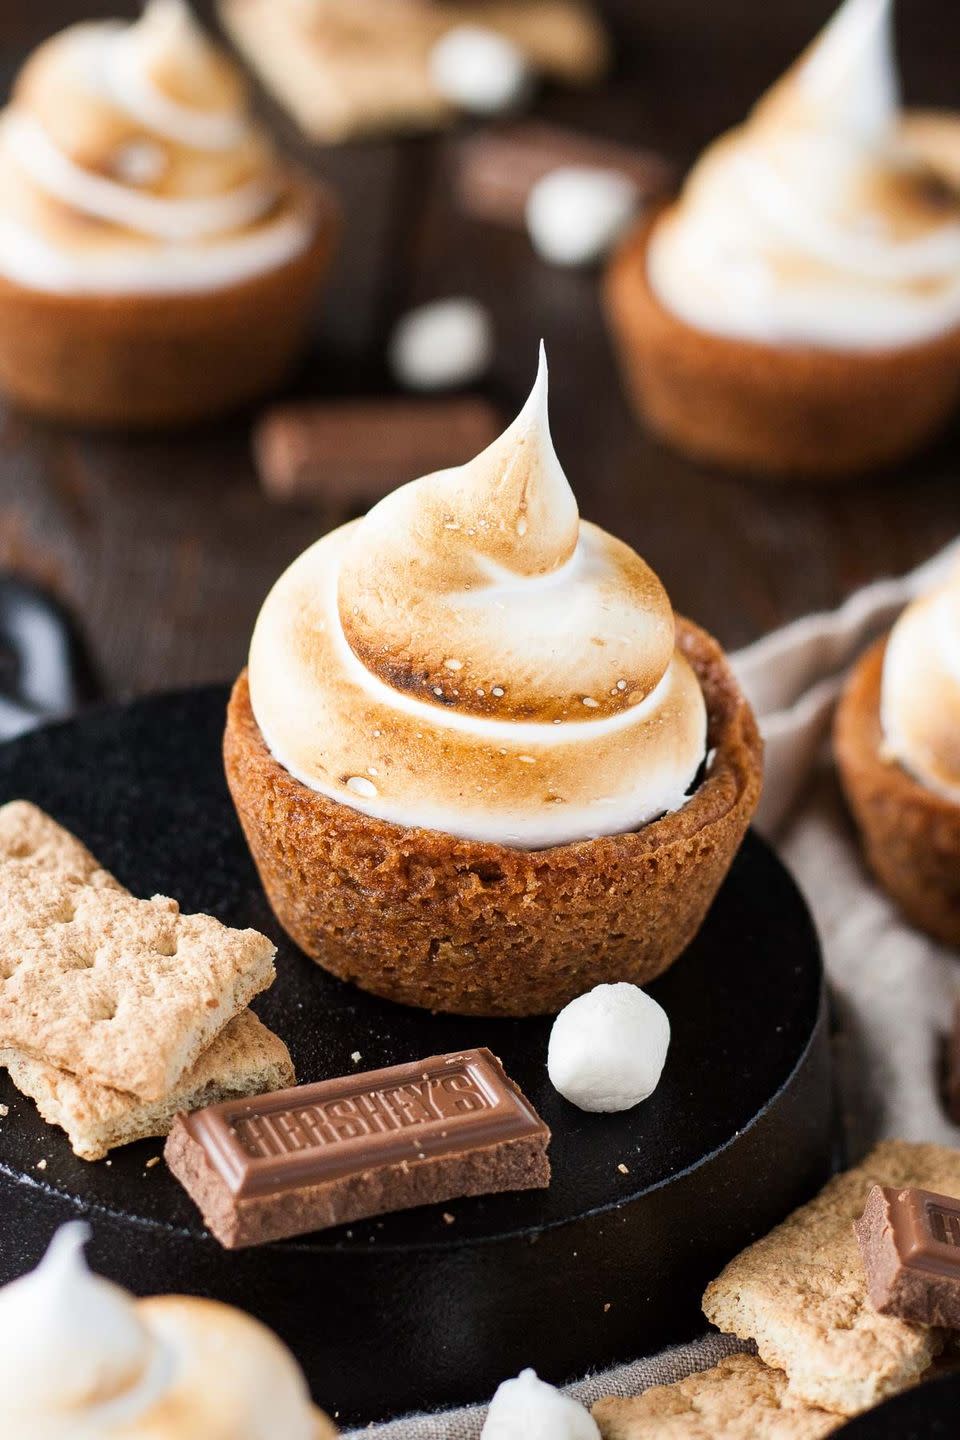 s'mores cookie cups with a cookie cup crust, chocolate filling, and toasted meringue topping, on a plate with graham crackers, hershey's chocolate square, and marshmallow